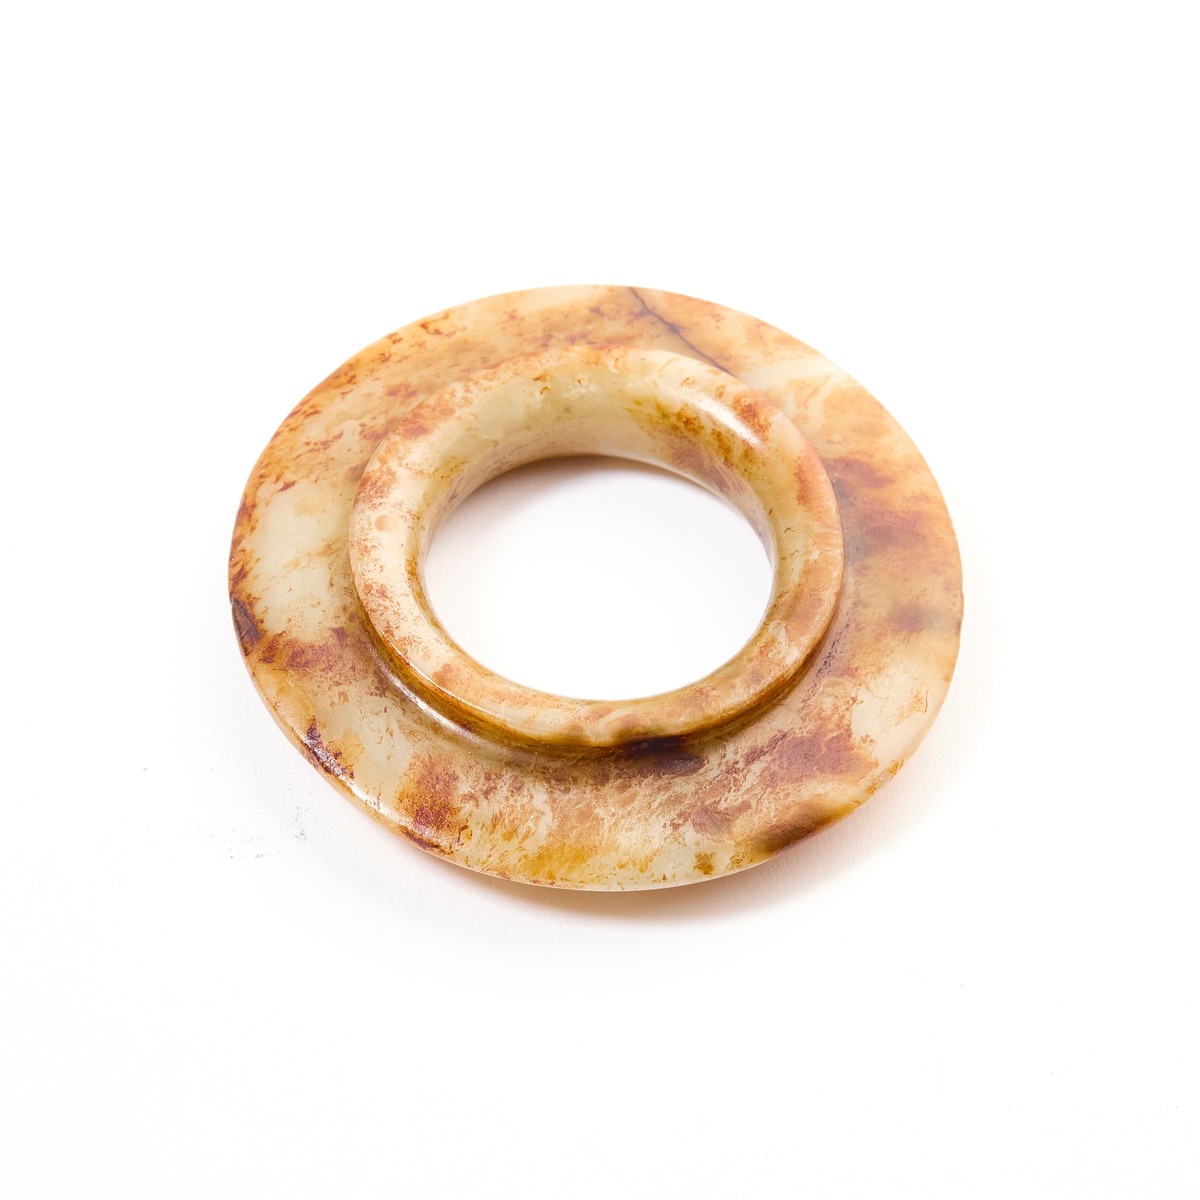 A White and Russet Jade Ring-Shaped Ornament, Song-Ming Dynasty (960-1644), 宋/明 白玉带皮凸唇环, diameter 2. - Image 2 of 7